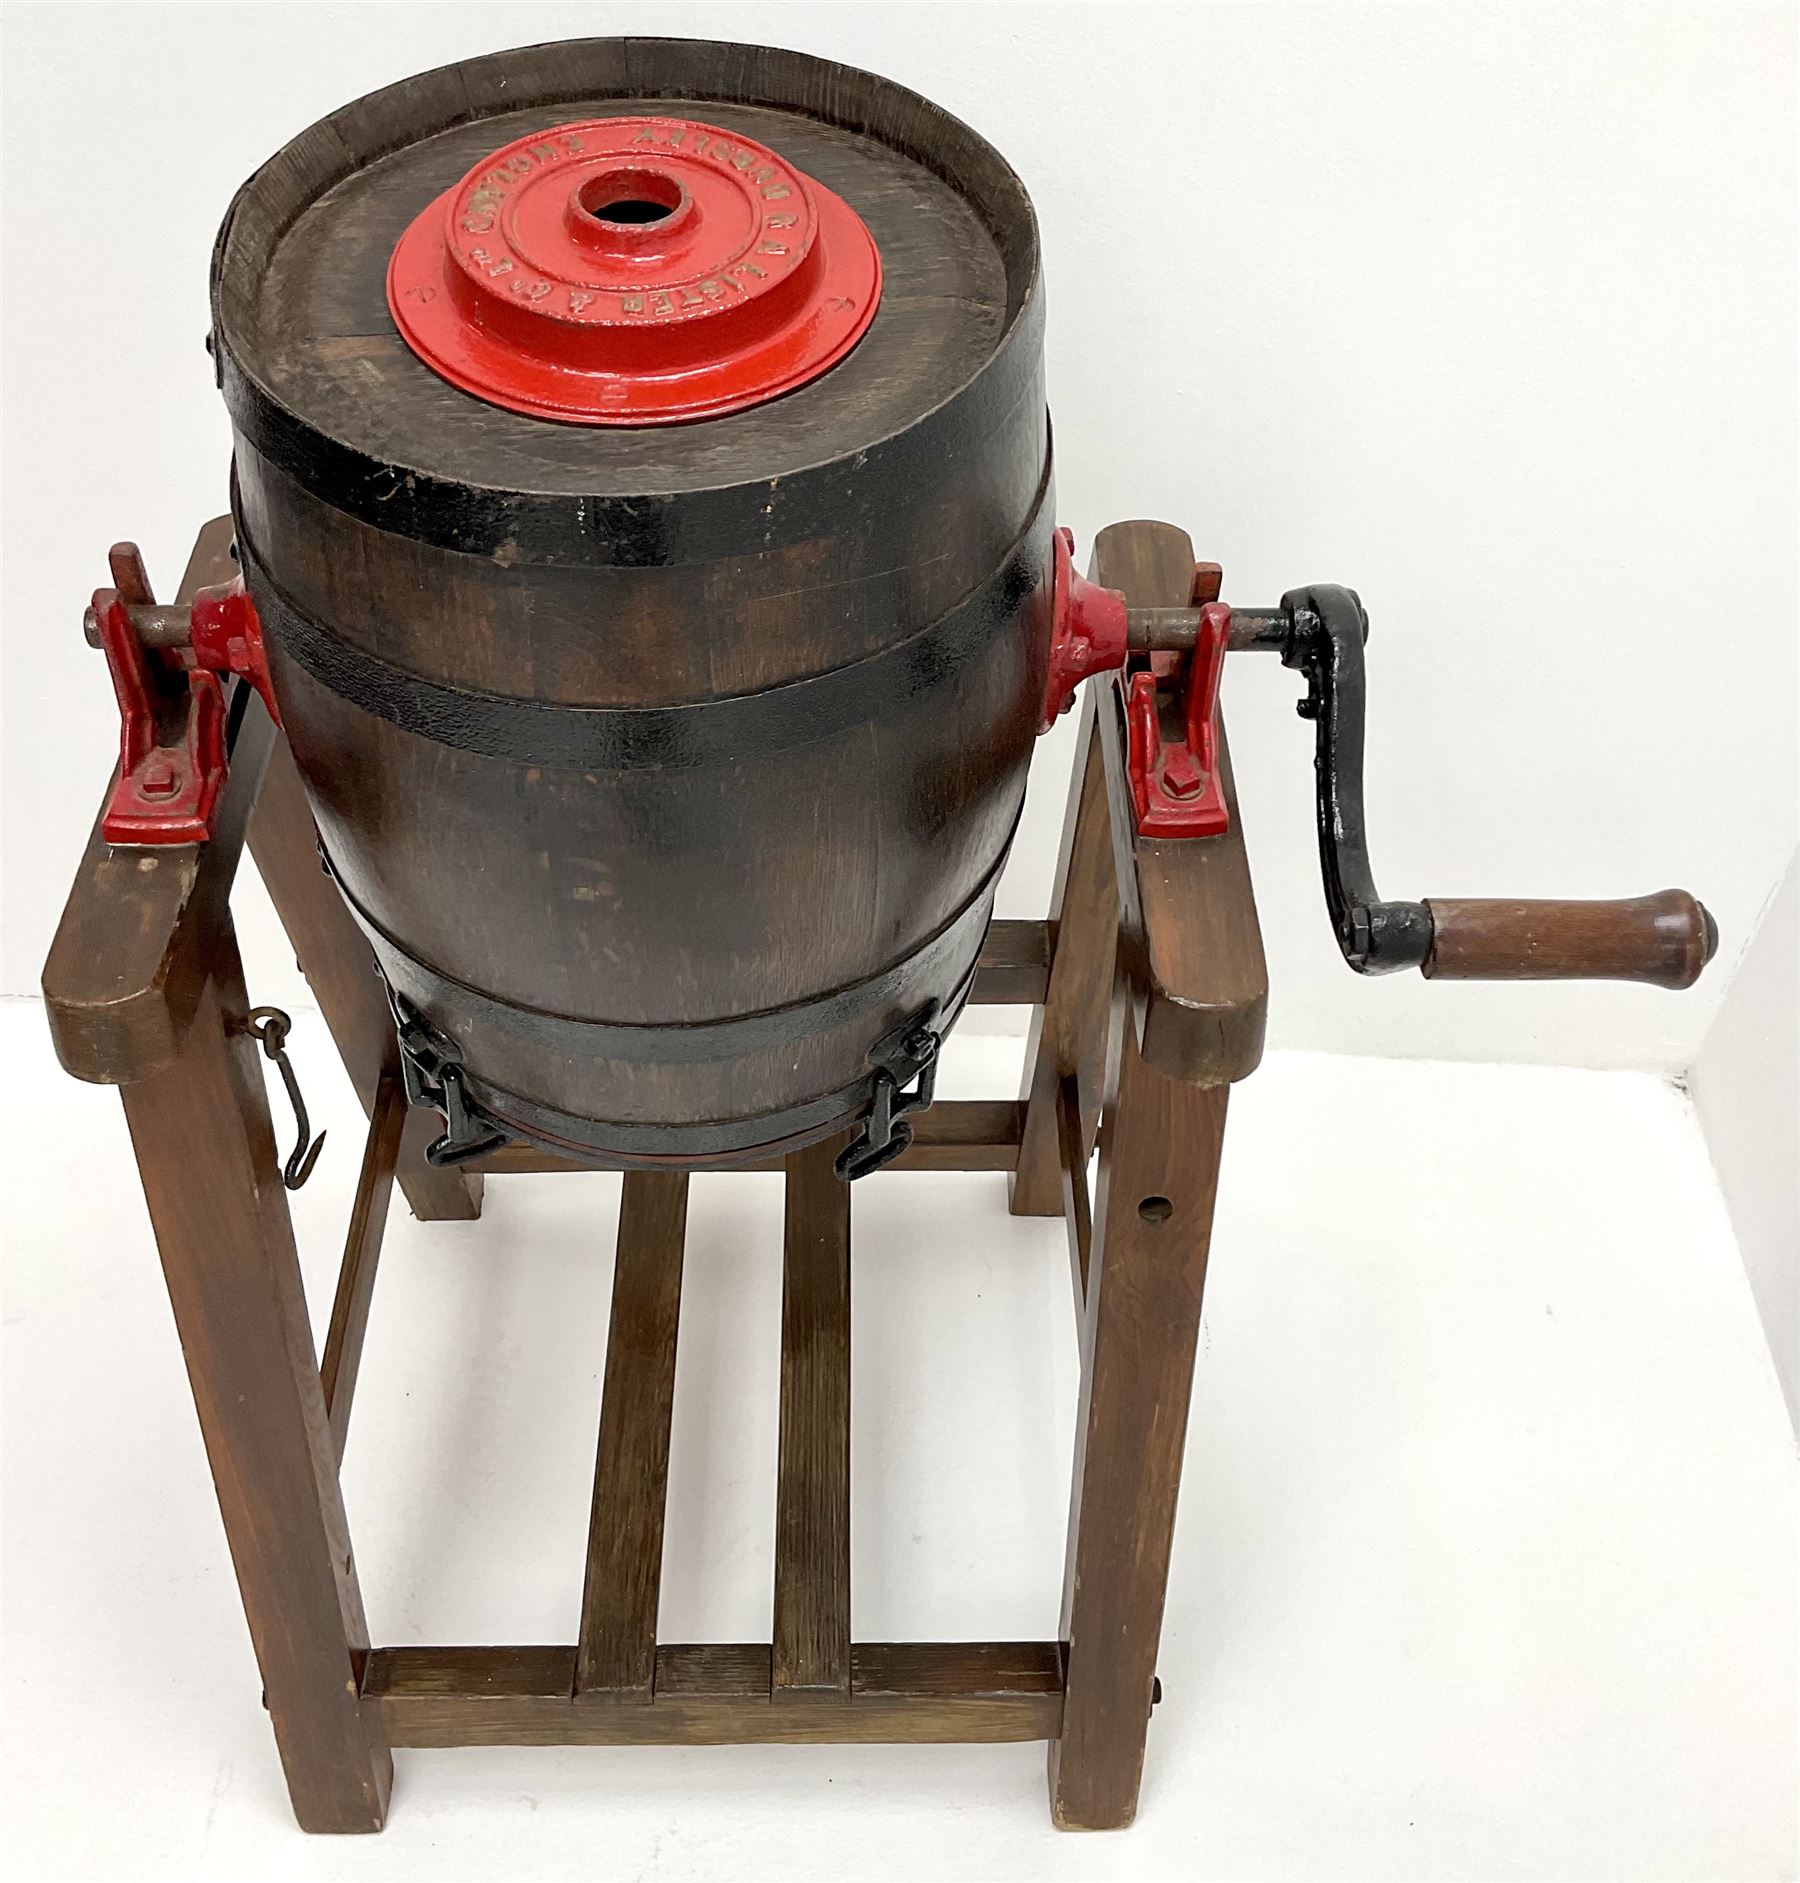 R A Lister & Co LTD revolving metal and wooden butter churn - Image 2 of 3